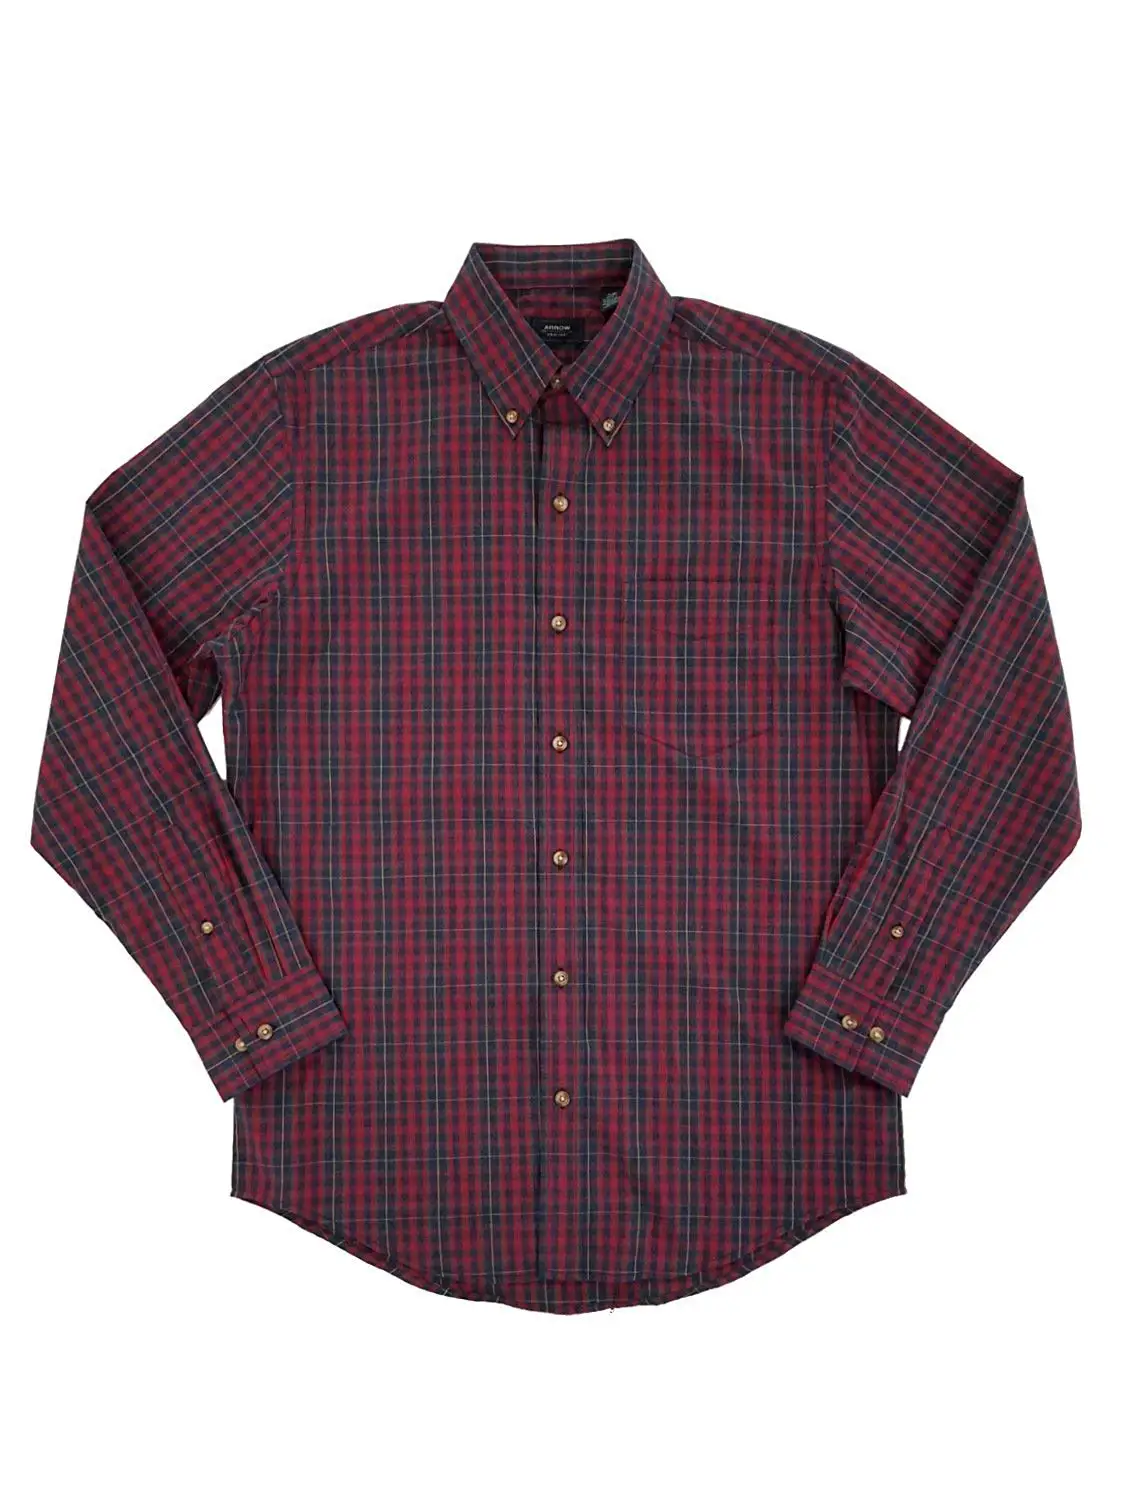 red and black plaid button down shirt